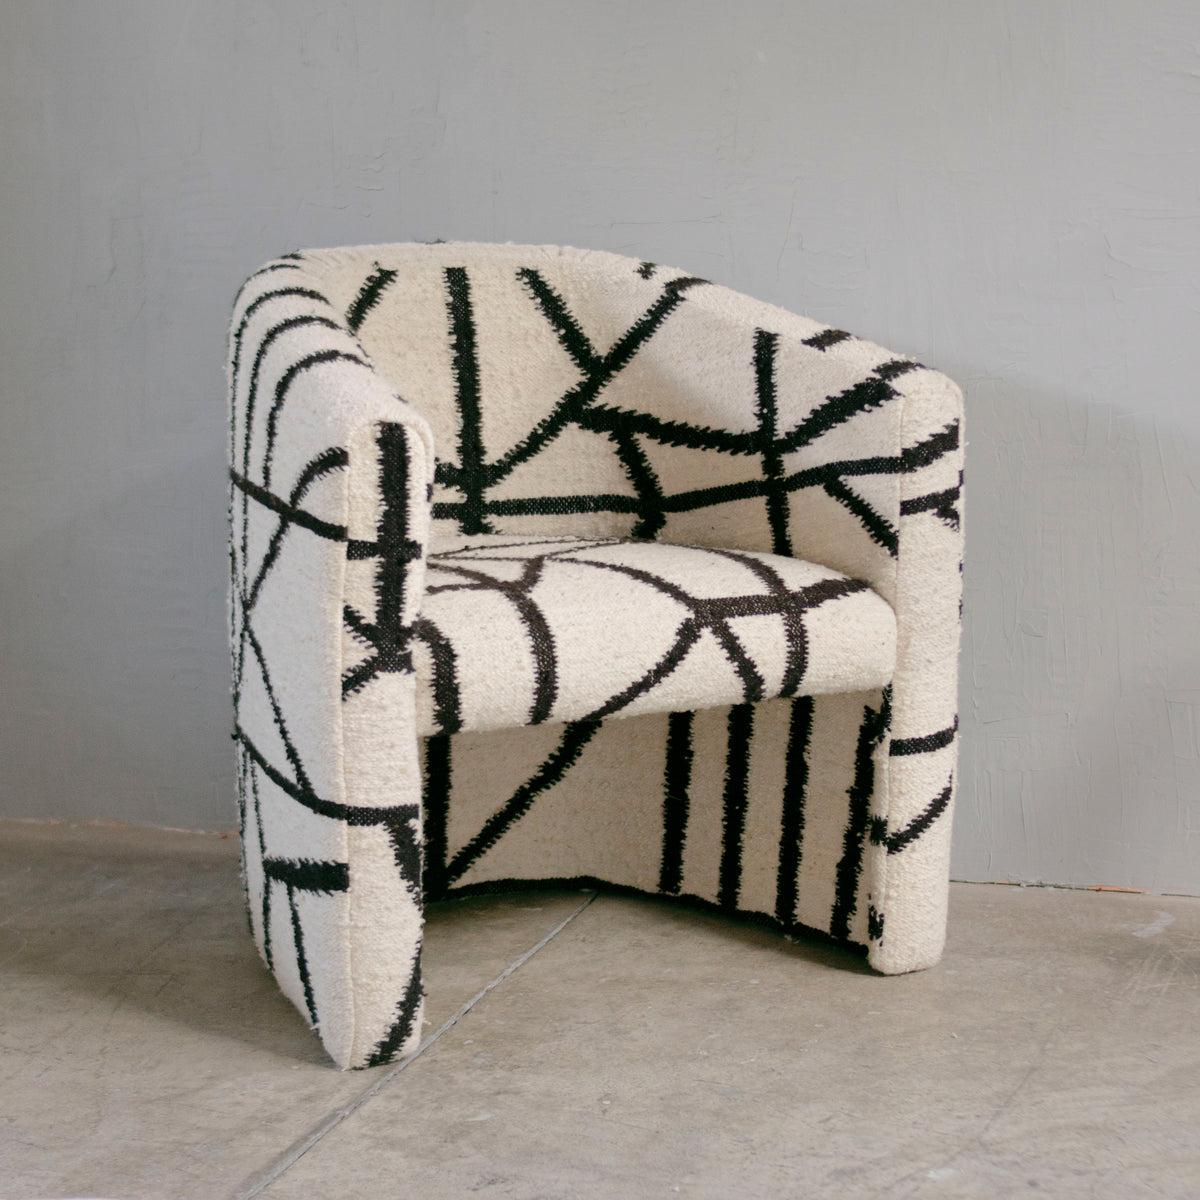 The Senderos Wool Chair is a unique and creatively designed piece of furniture that explores the interplay between lines. This chair is crafted by artisans in Momostenango, Guatemala, who weave each piece on a pedal loom using hand-spun wool. The